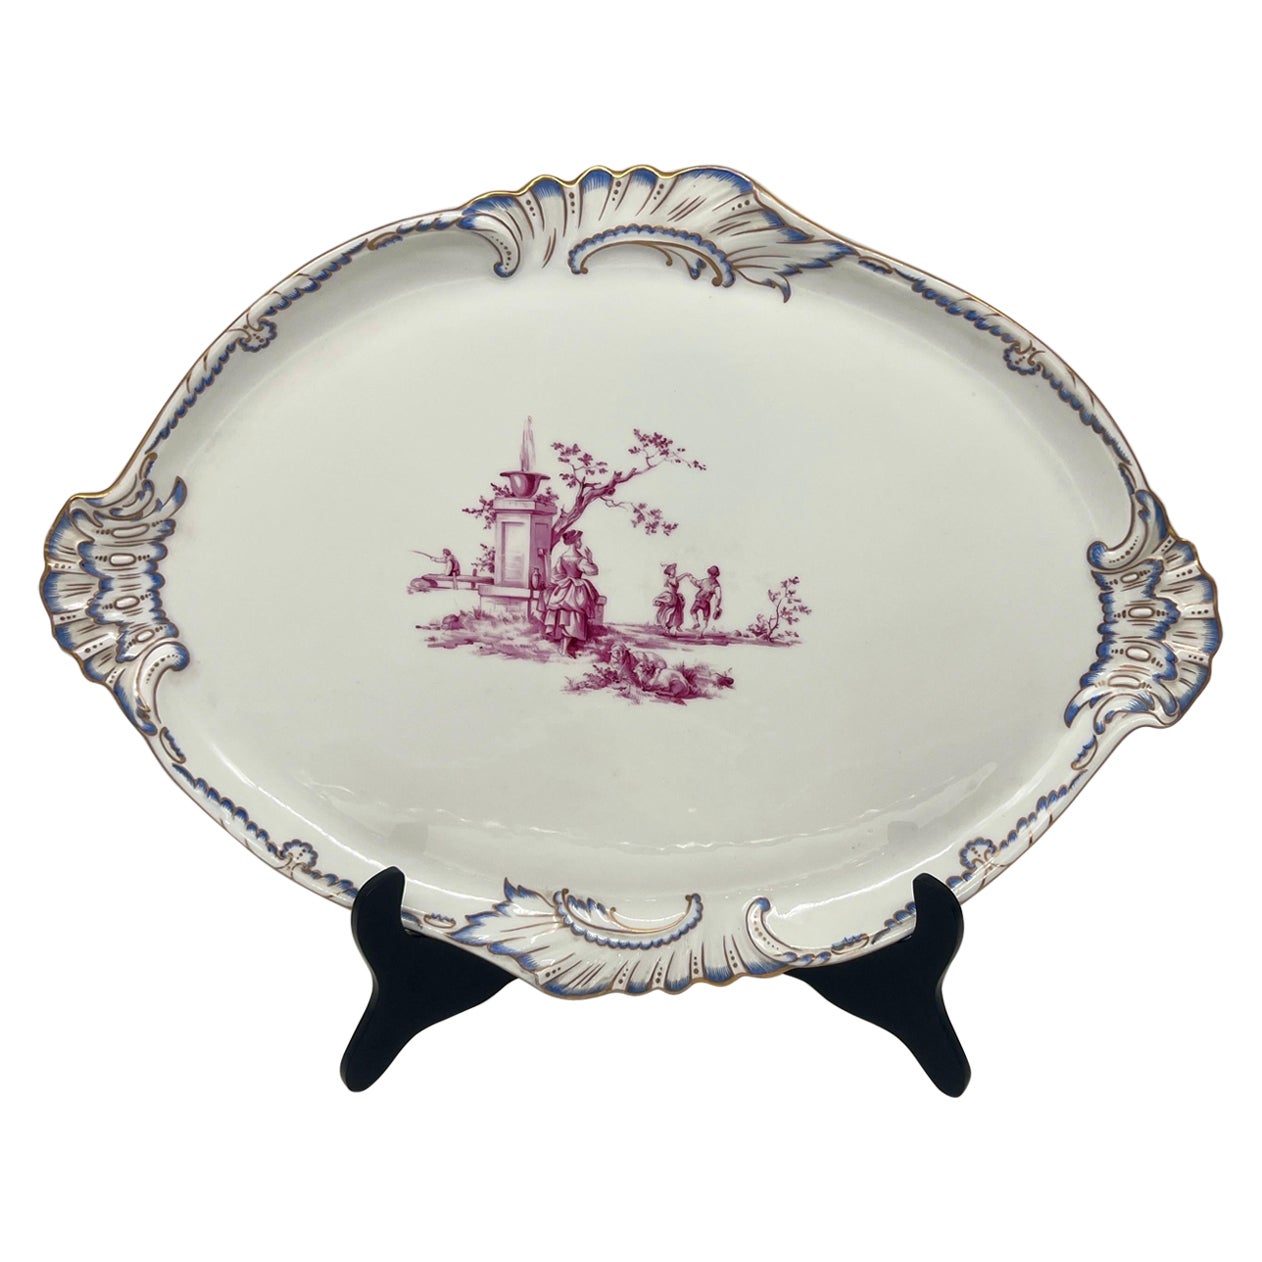 Herend Porcelain Puce Classical & Shell Bordered Platter Circa 1916 For Sale